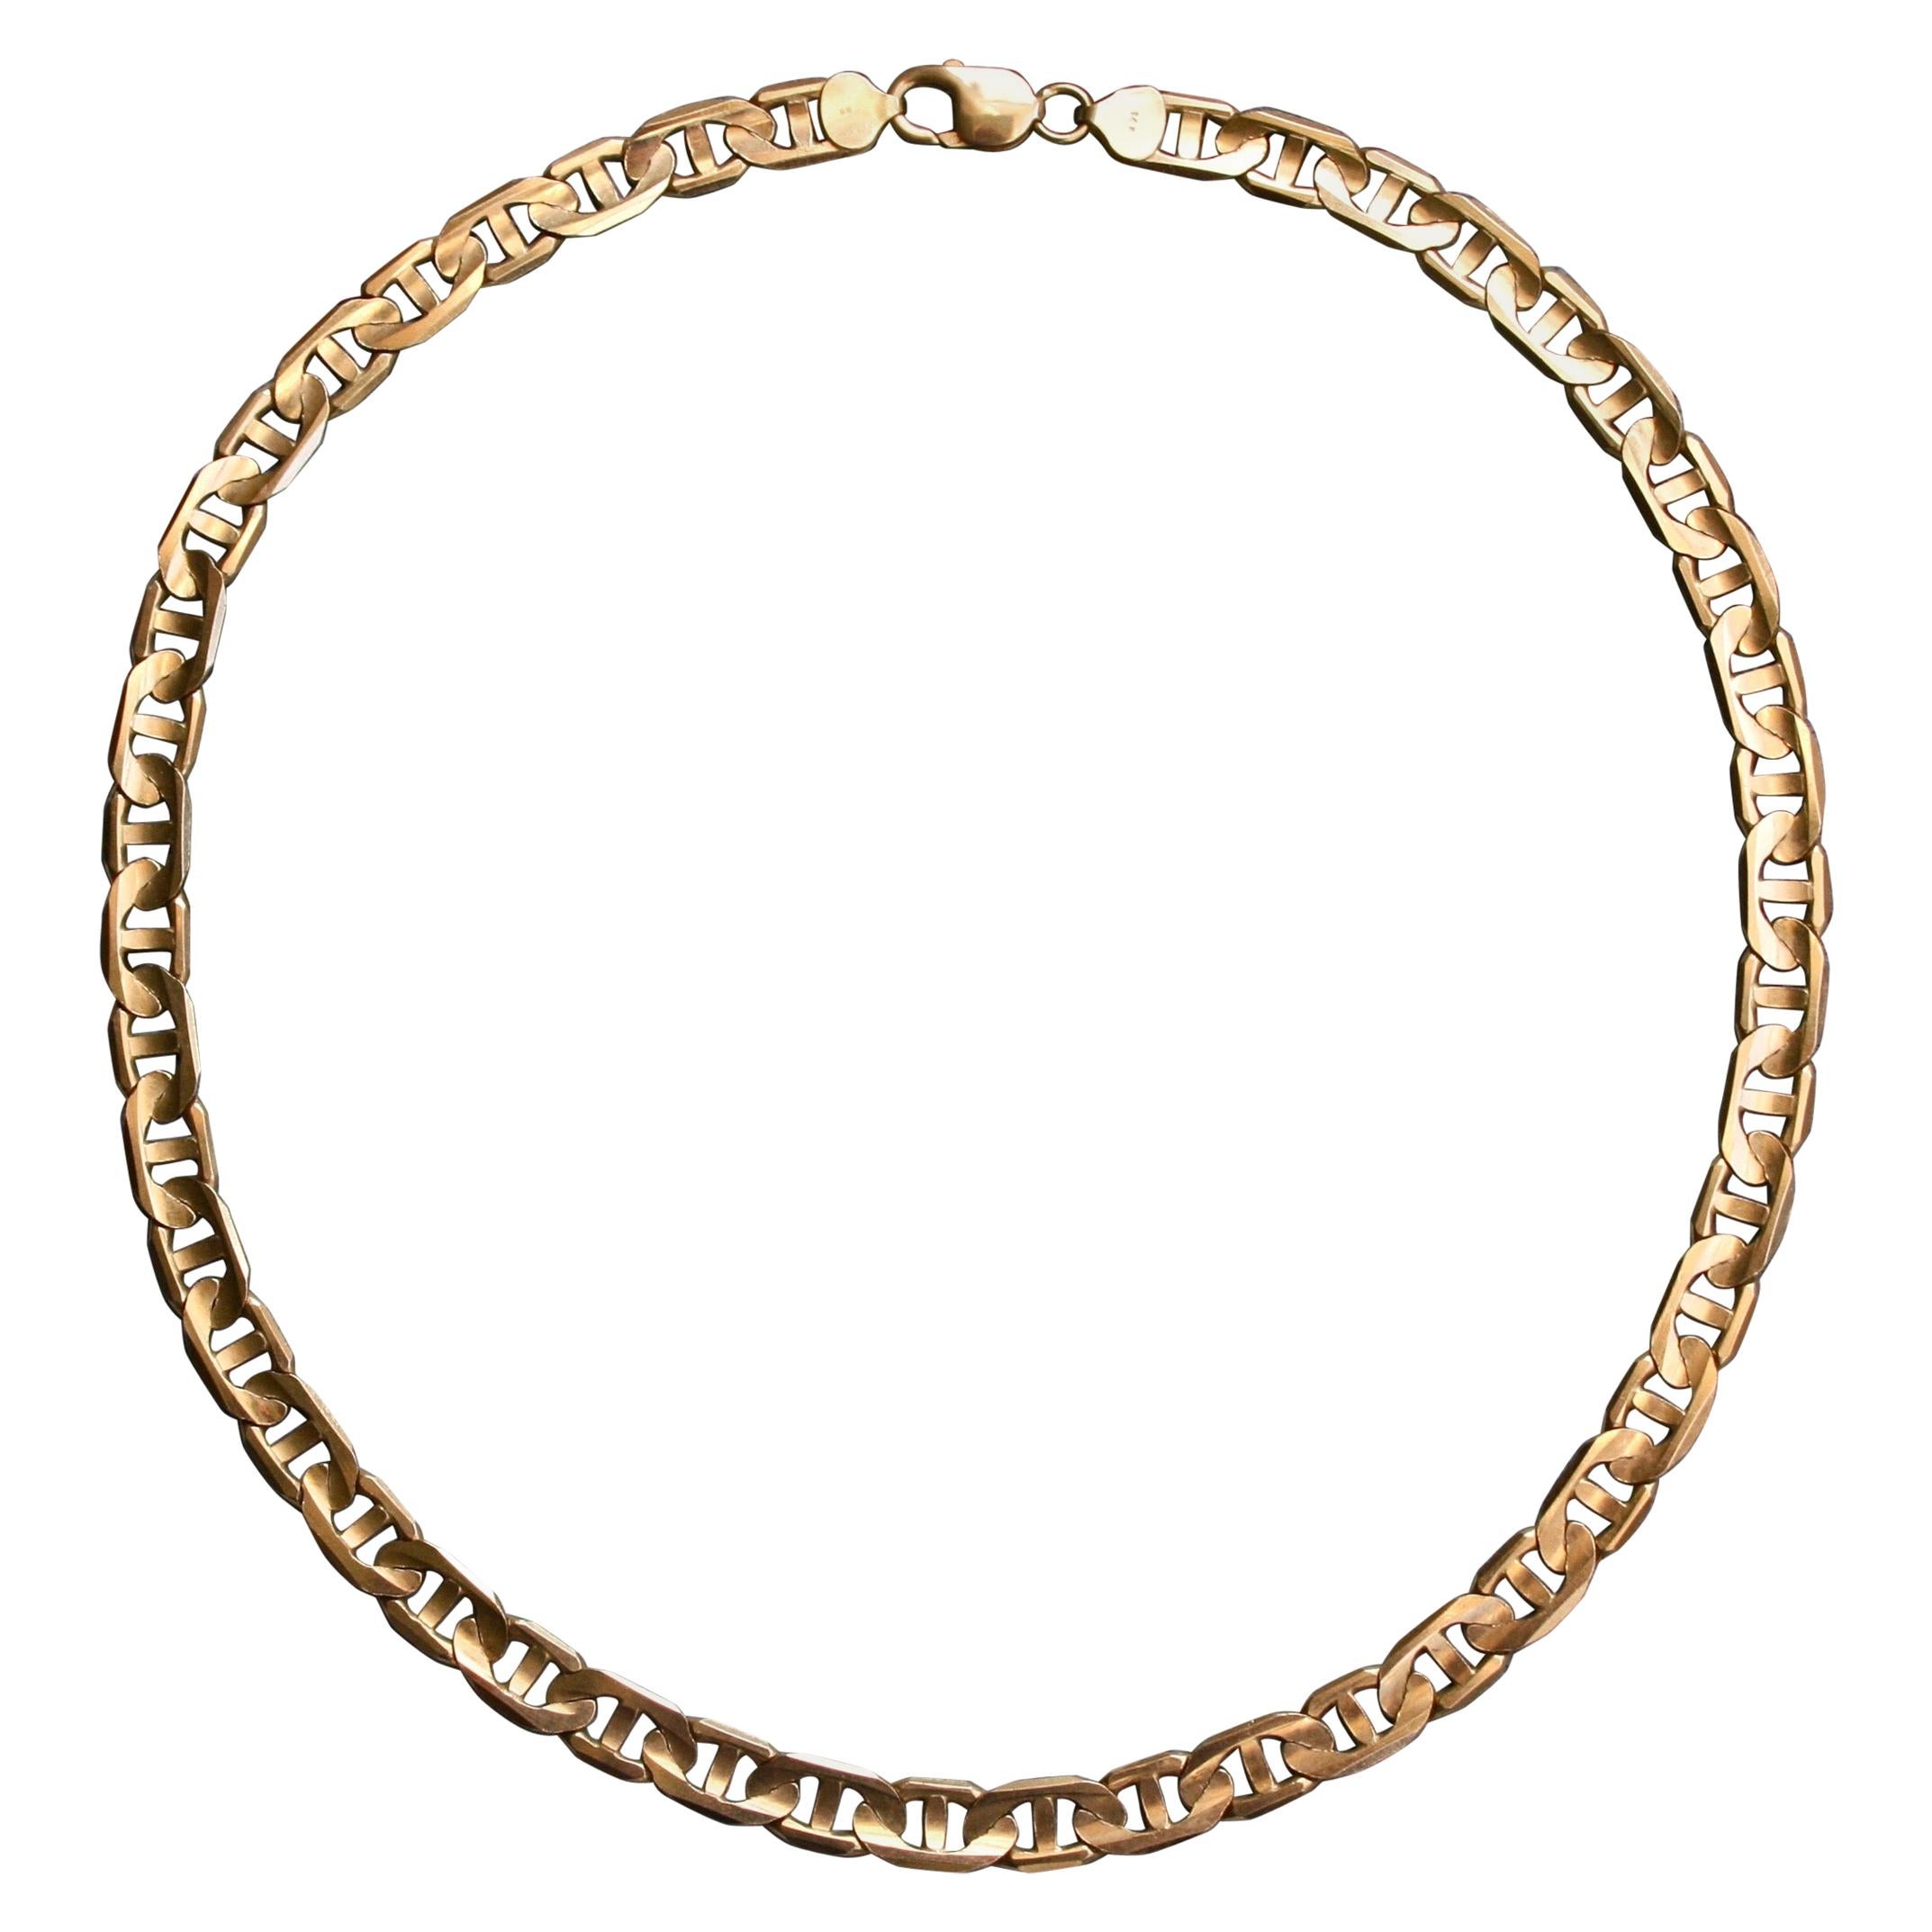 Gorgeous Vintage 14 Karat Yellow Gold Modified Curbed Link Chain For Sale